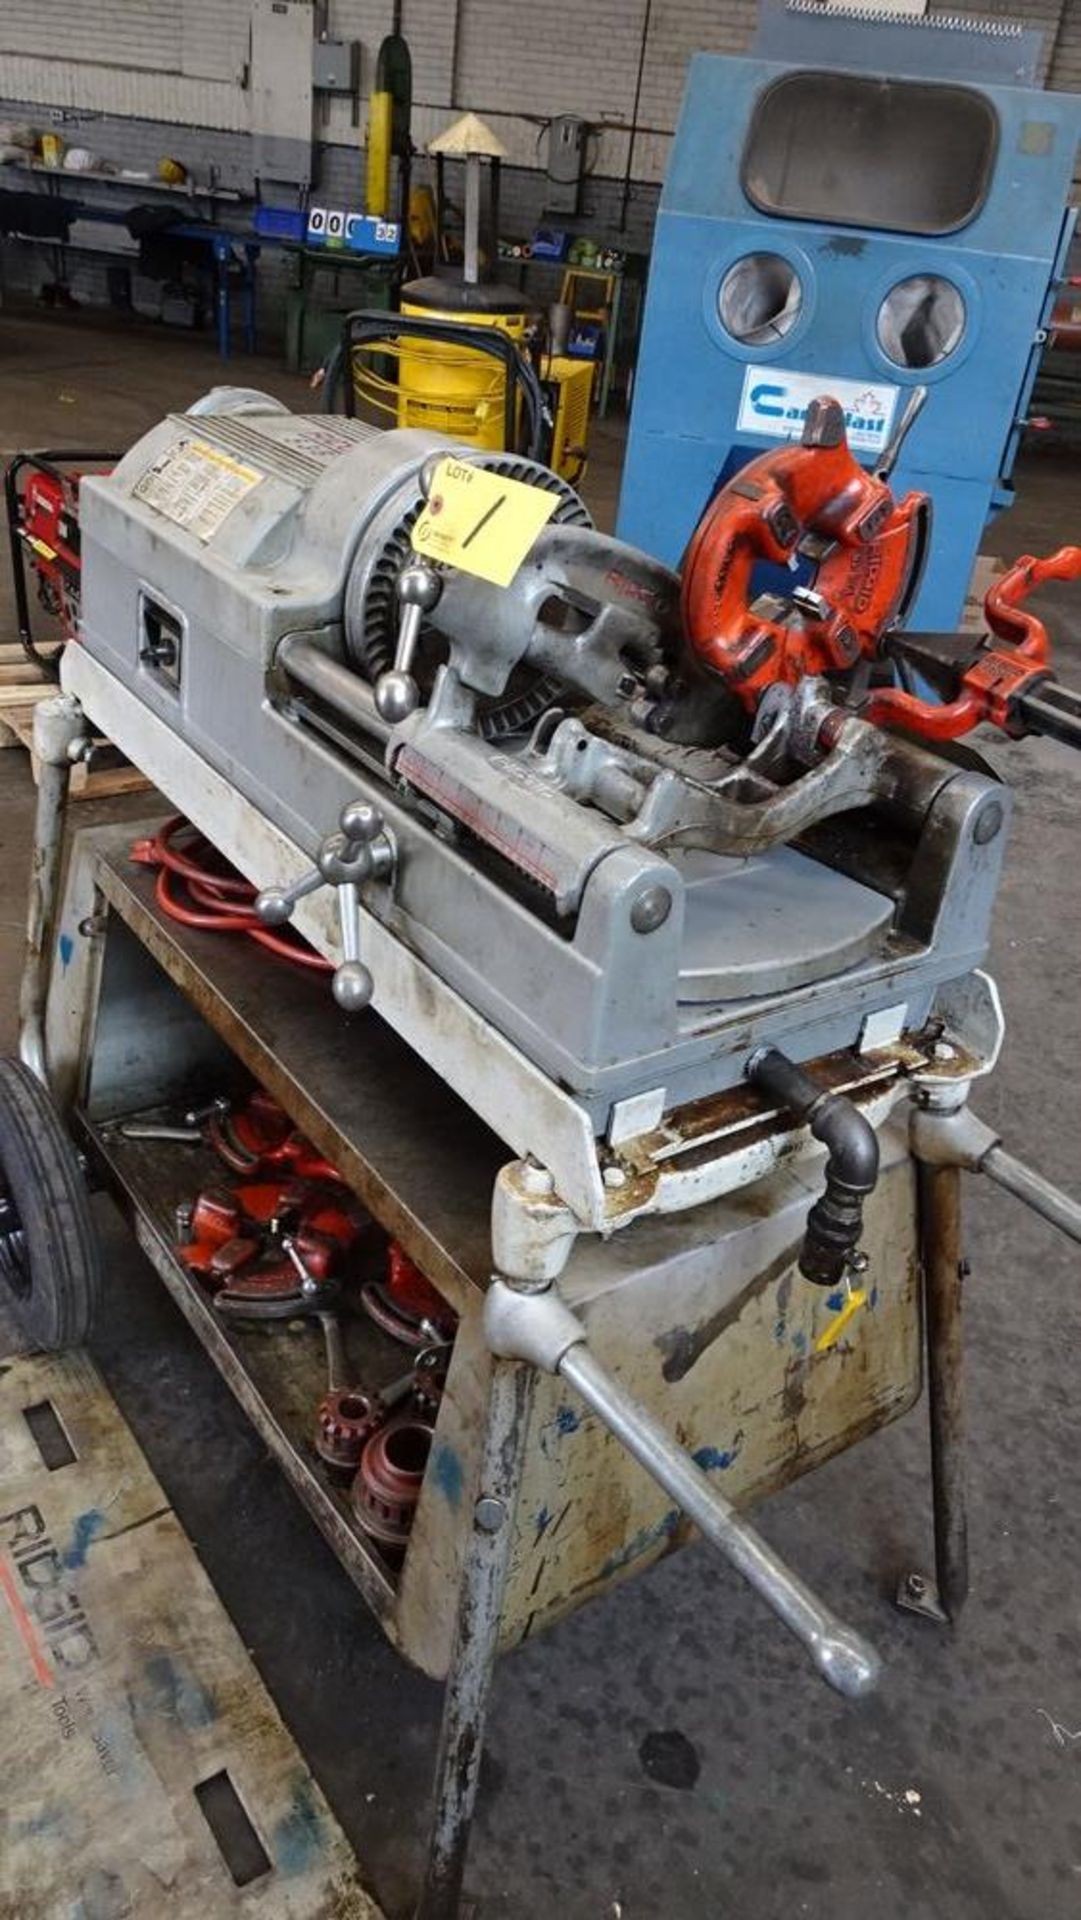 RIDGID 535 THREADER C/W SPARE HEADS, DIES, FOOT CONTROL, CART MOUNTED (RIGGING FEE $25) - Image 2 of 5